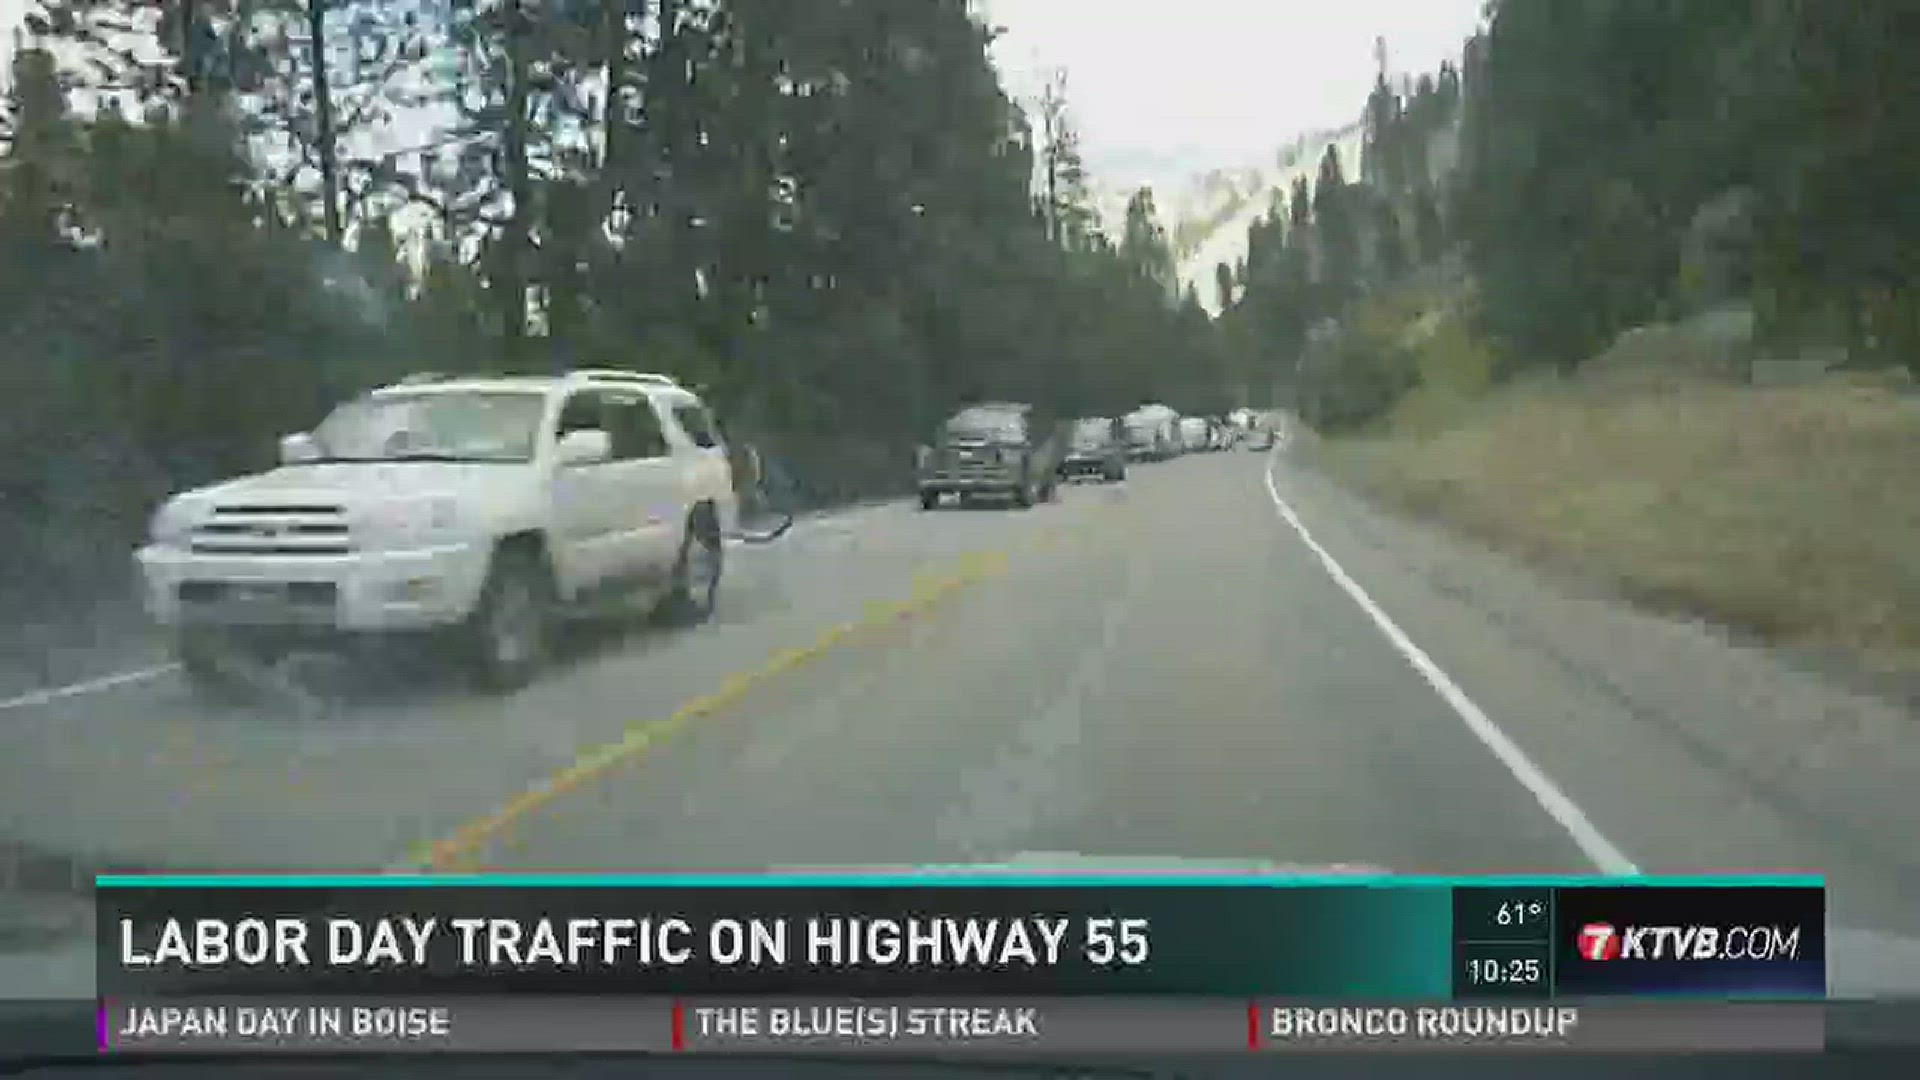 Time lapse video shows a steady stream of traffic heading down Highway 55 at the end of the Labor Day holiday.